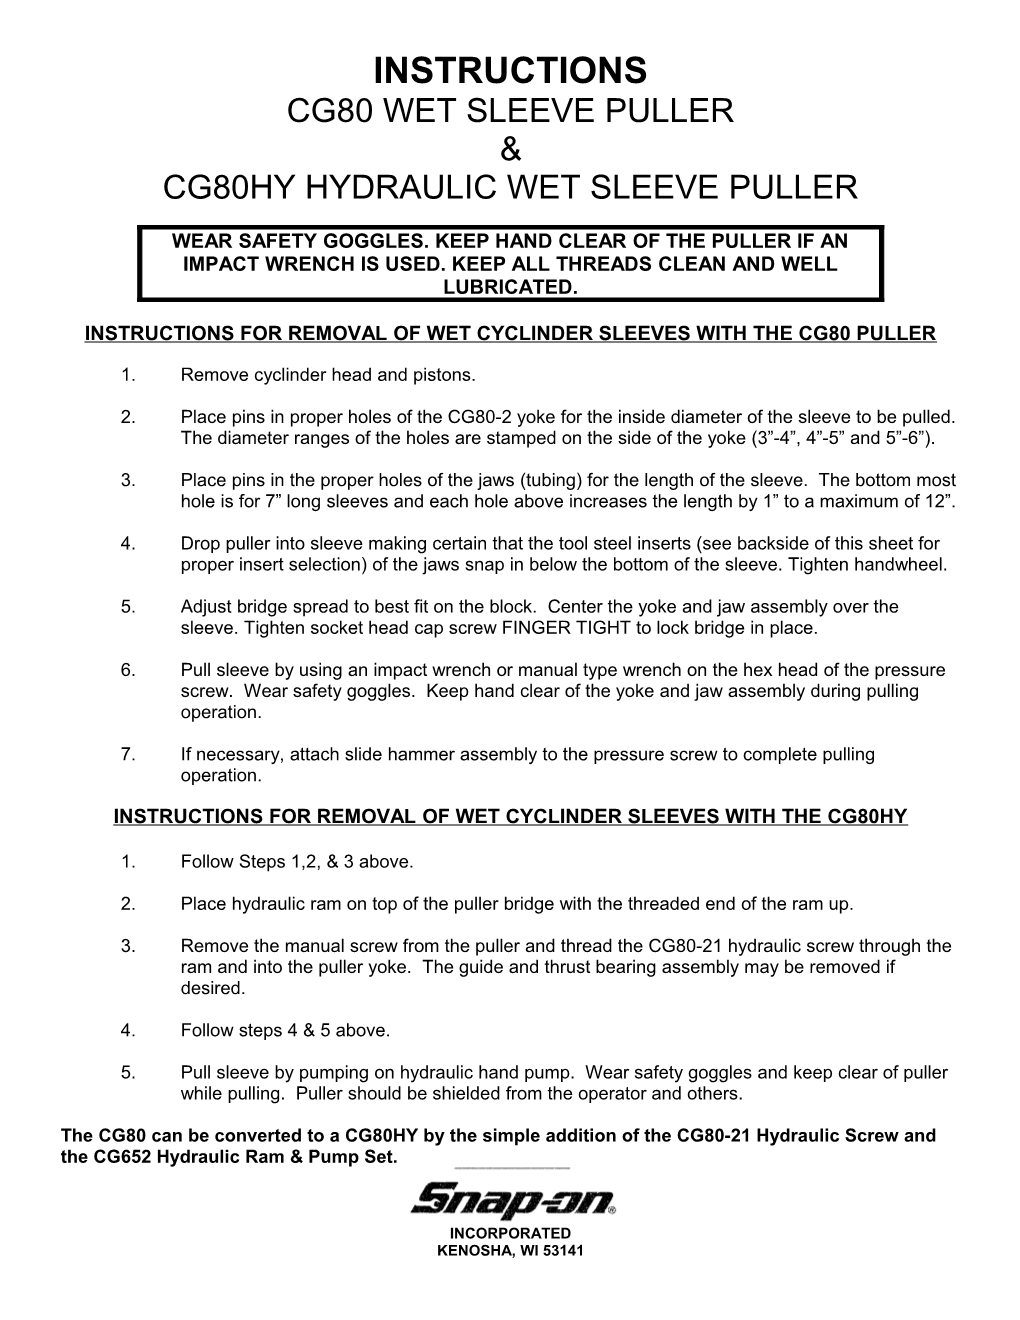 Instructions for Removal of Wet Cyclinder Sleeves with the Cg80 Puller